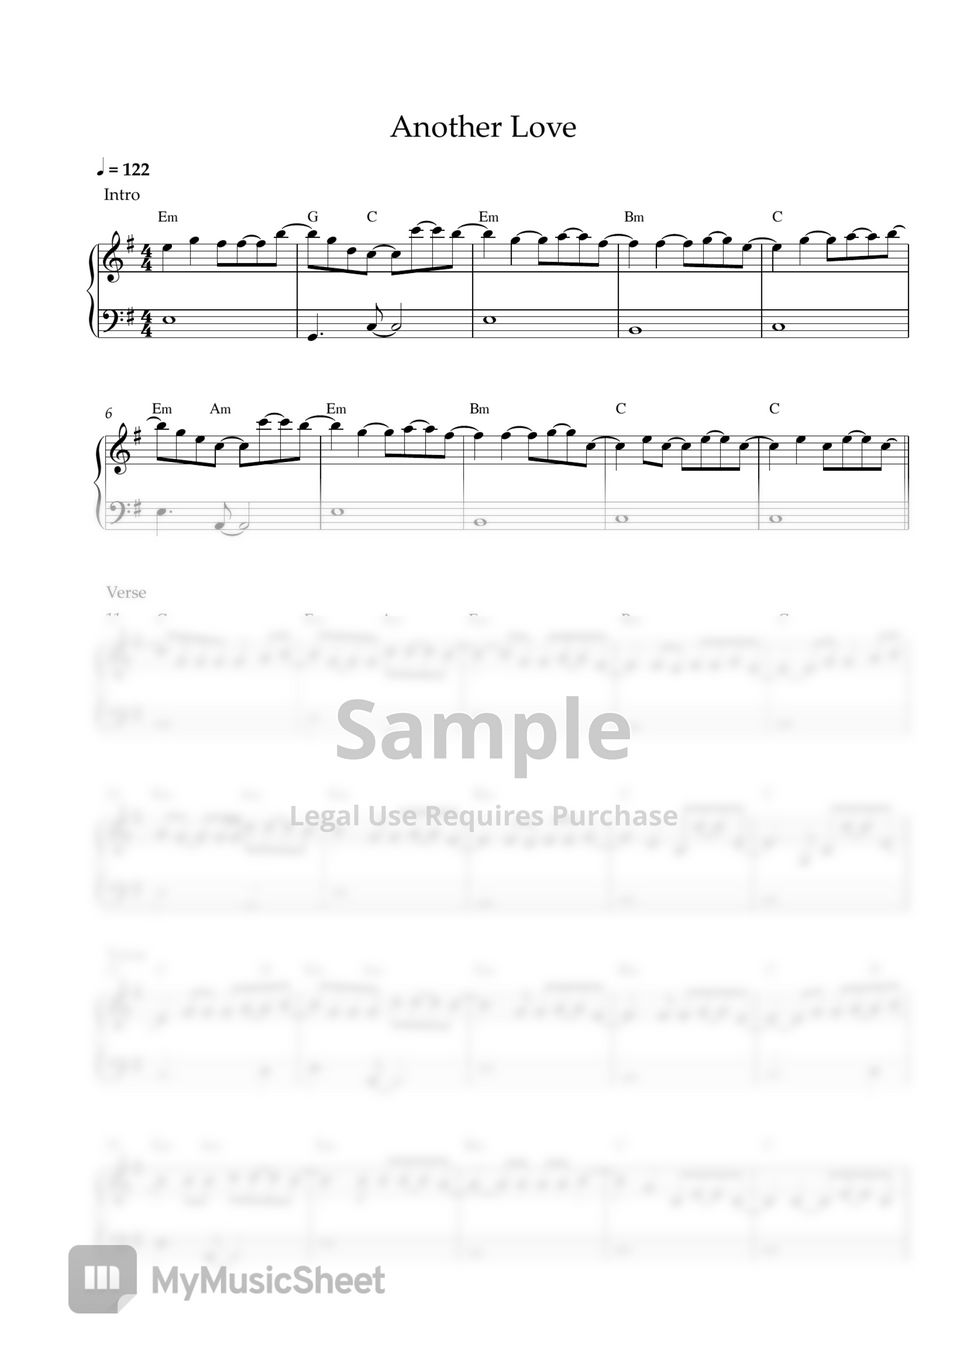 Tom Odell - Another Love (EASY PIANO SHEET) by Pianella Piano